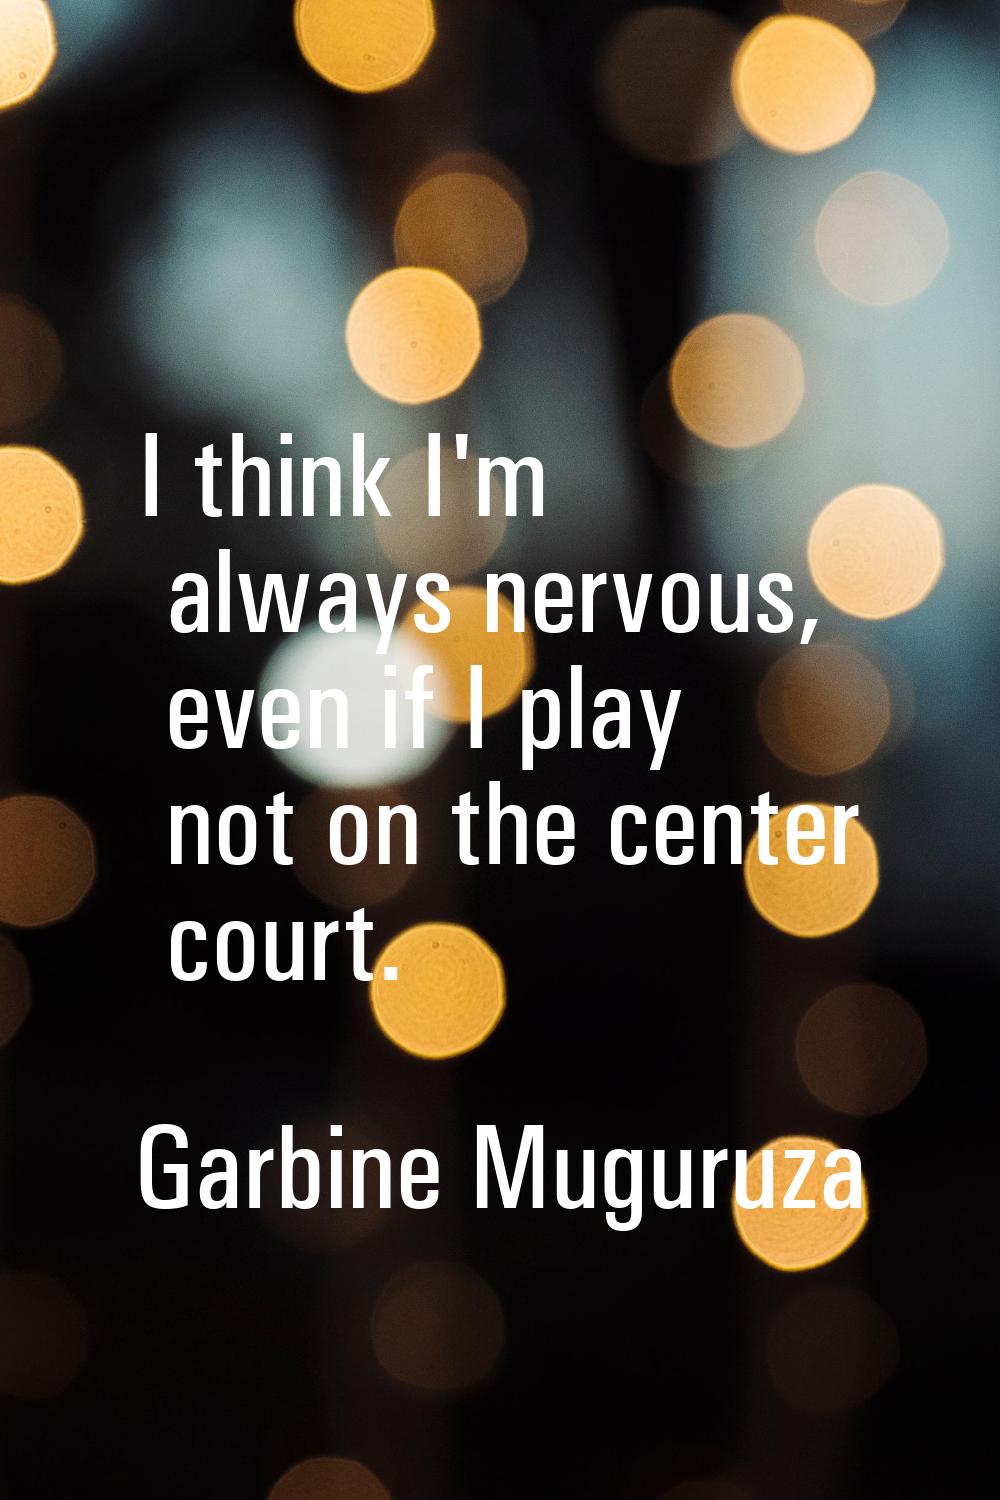 I think I'm always nervous, even if I play not on the center court.